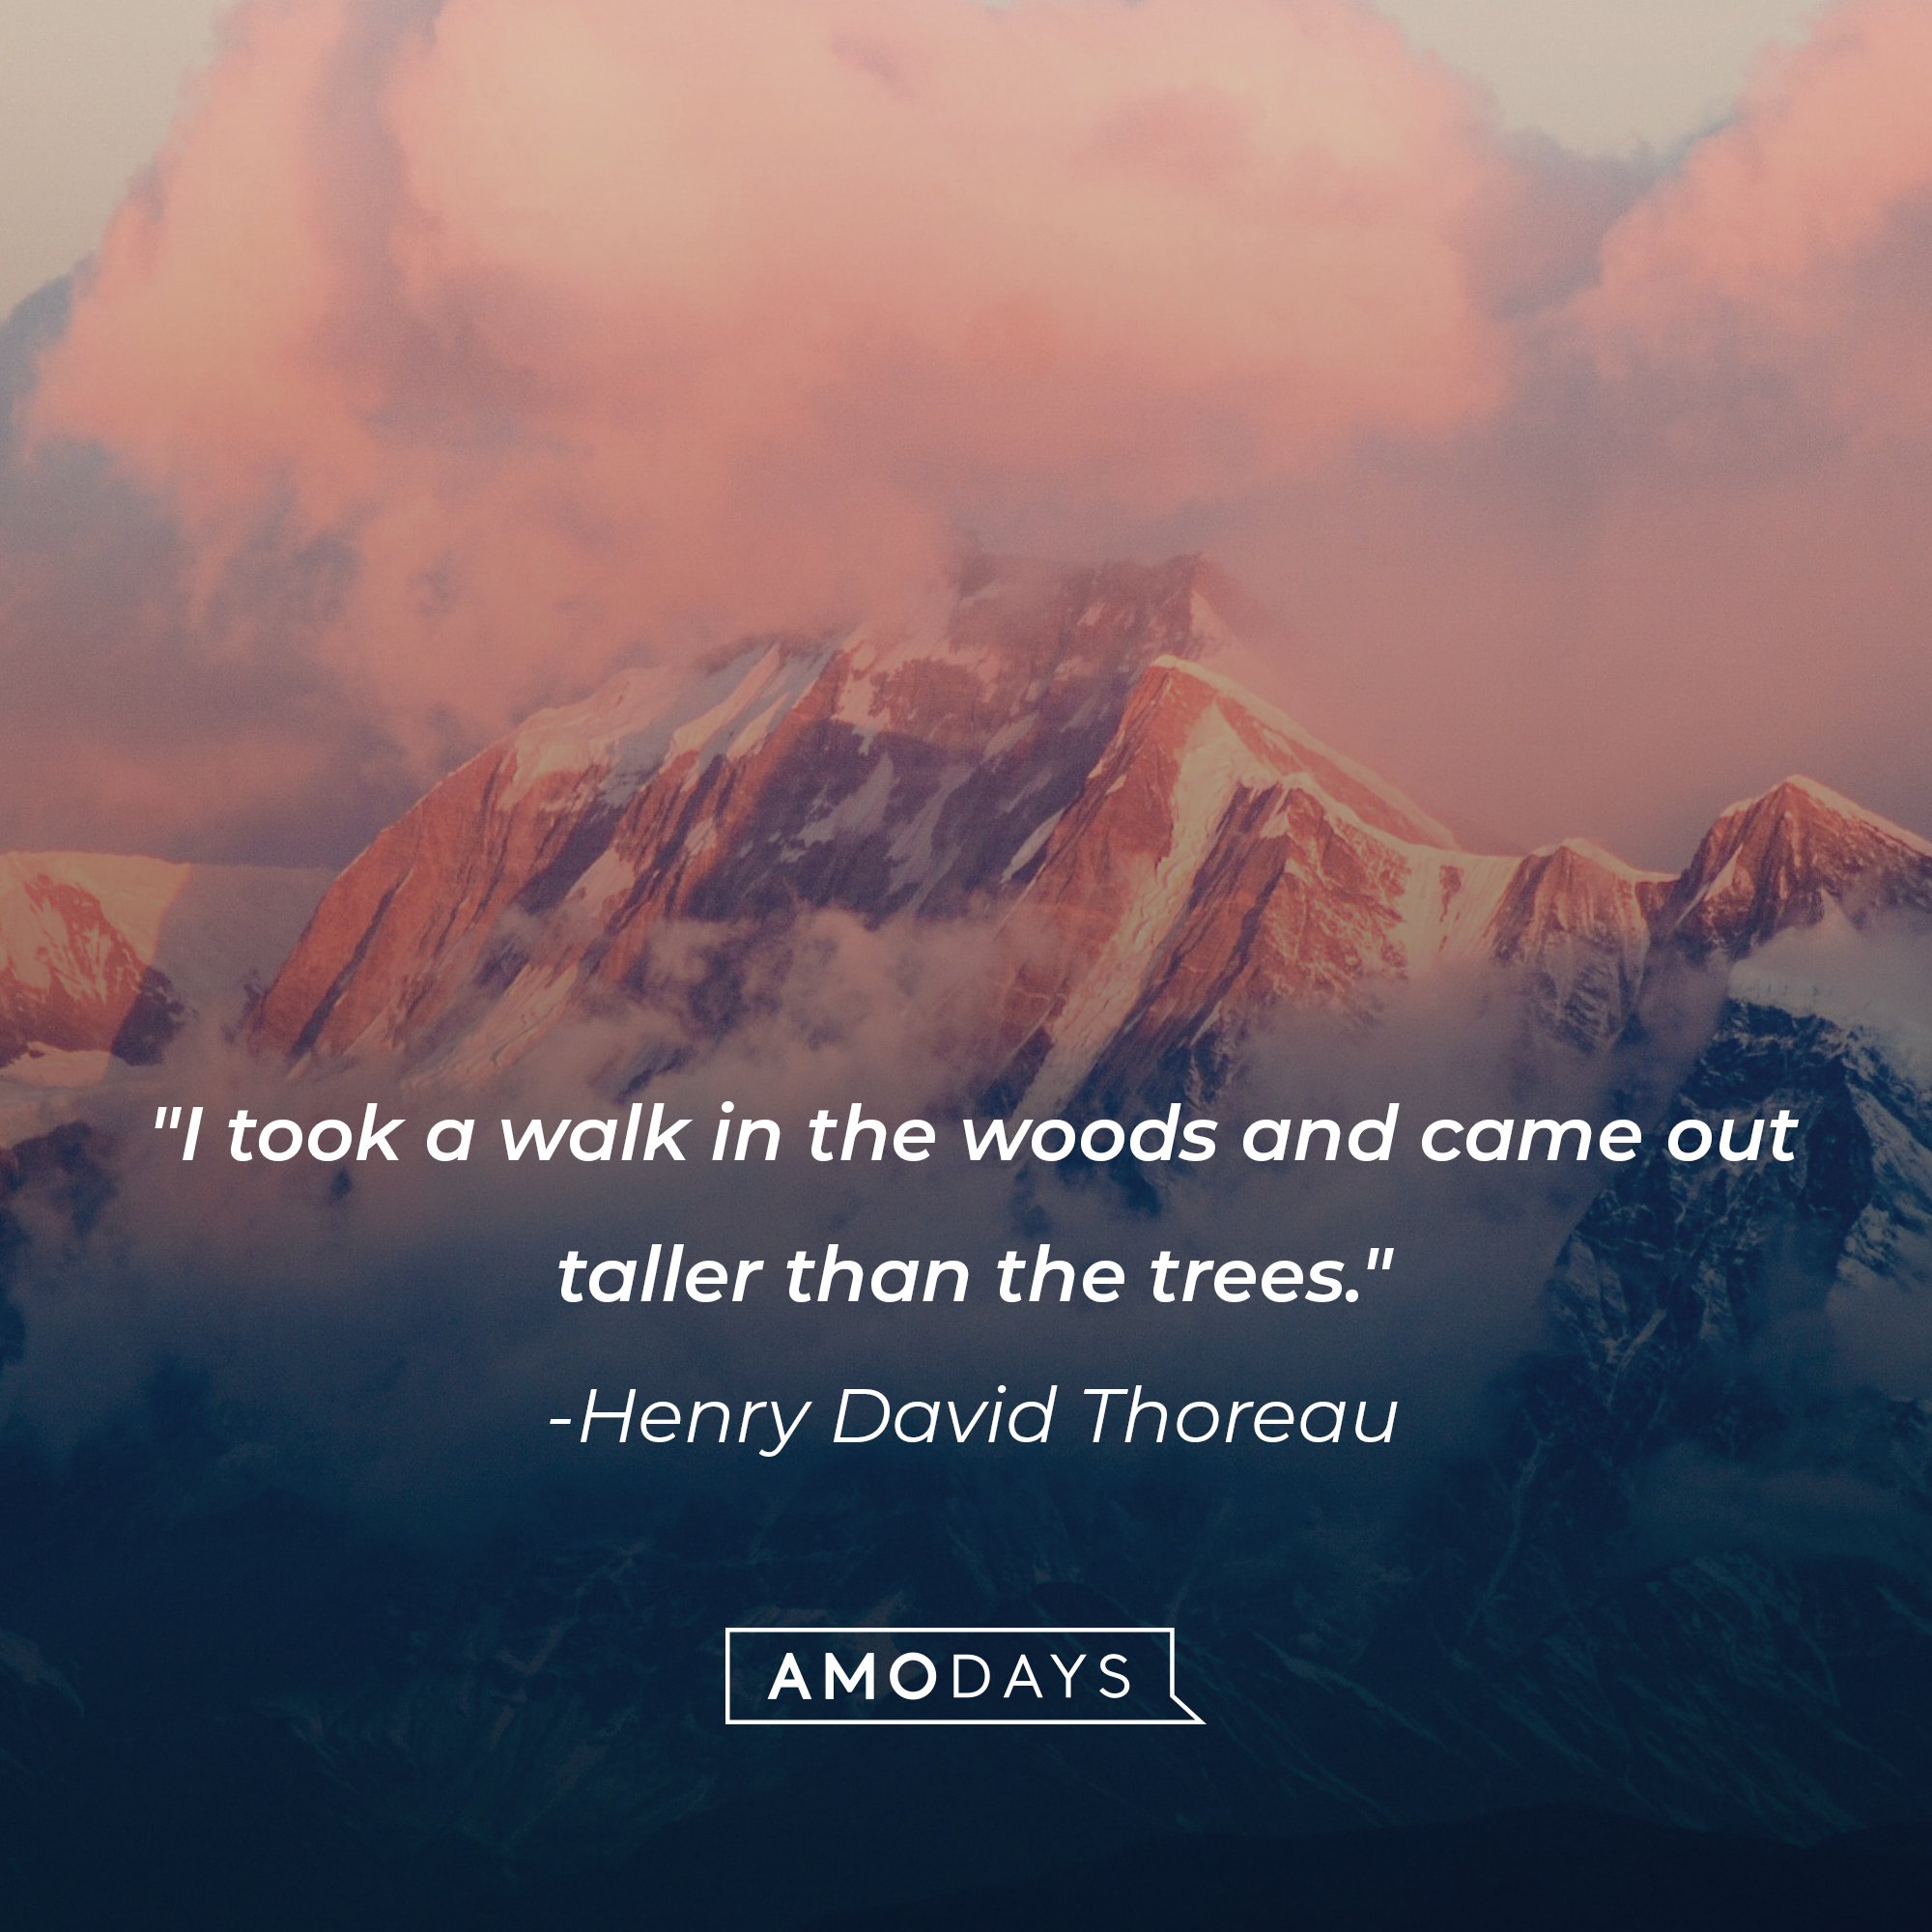 Henry David Thoreau's quote: "I took a walk in the woods and came out taller than the trees." | Image: AmoDays